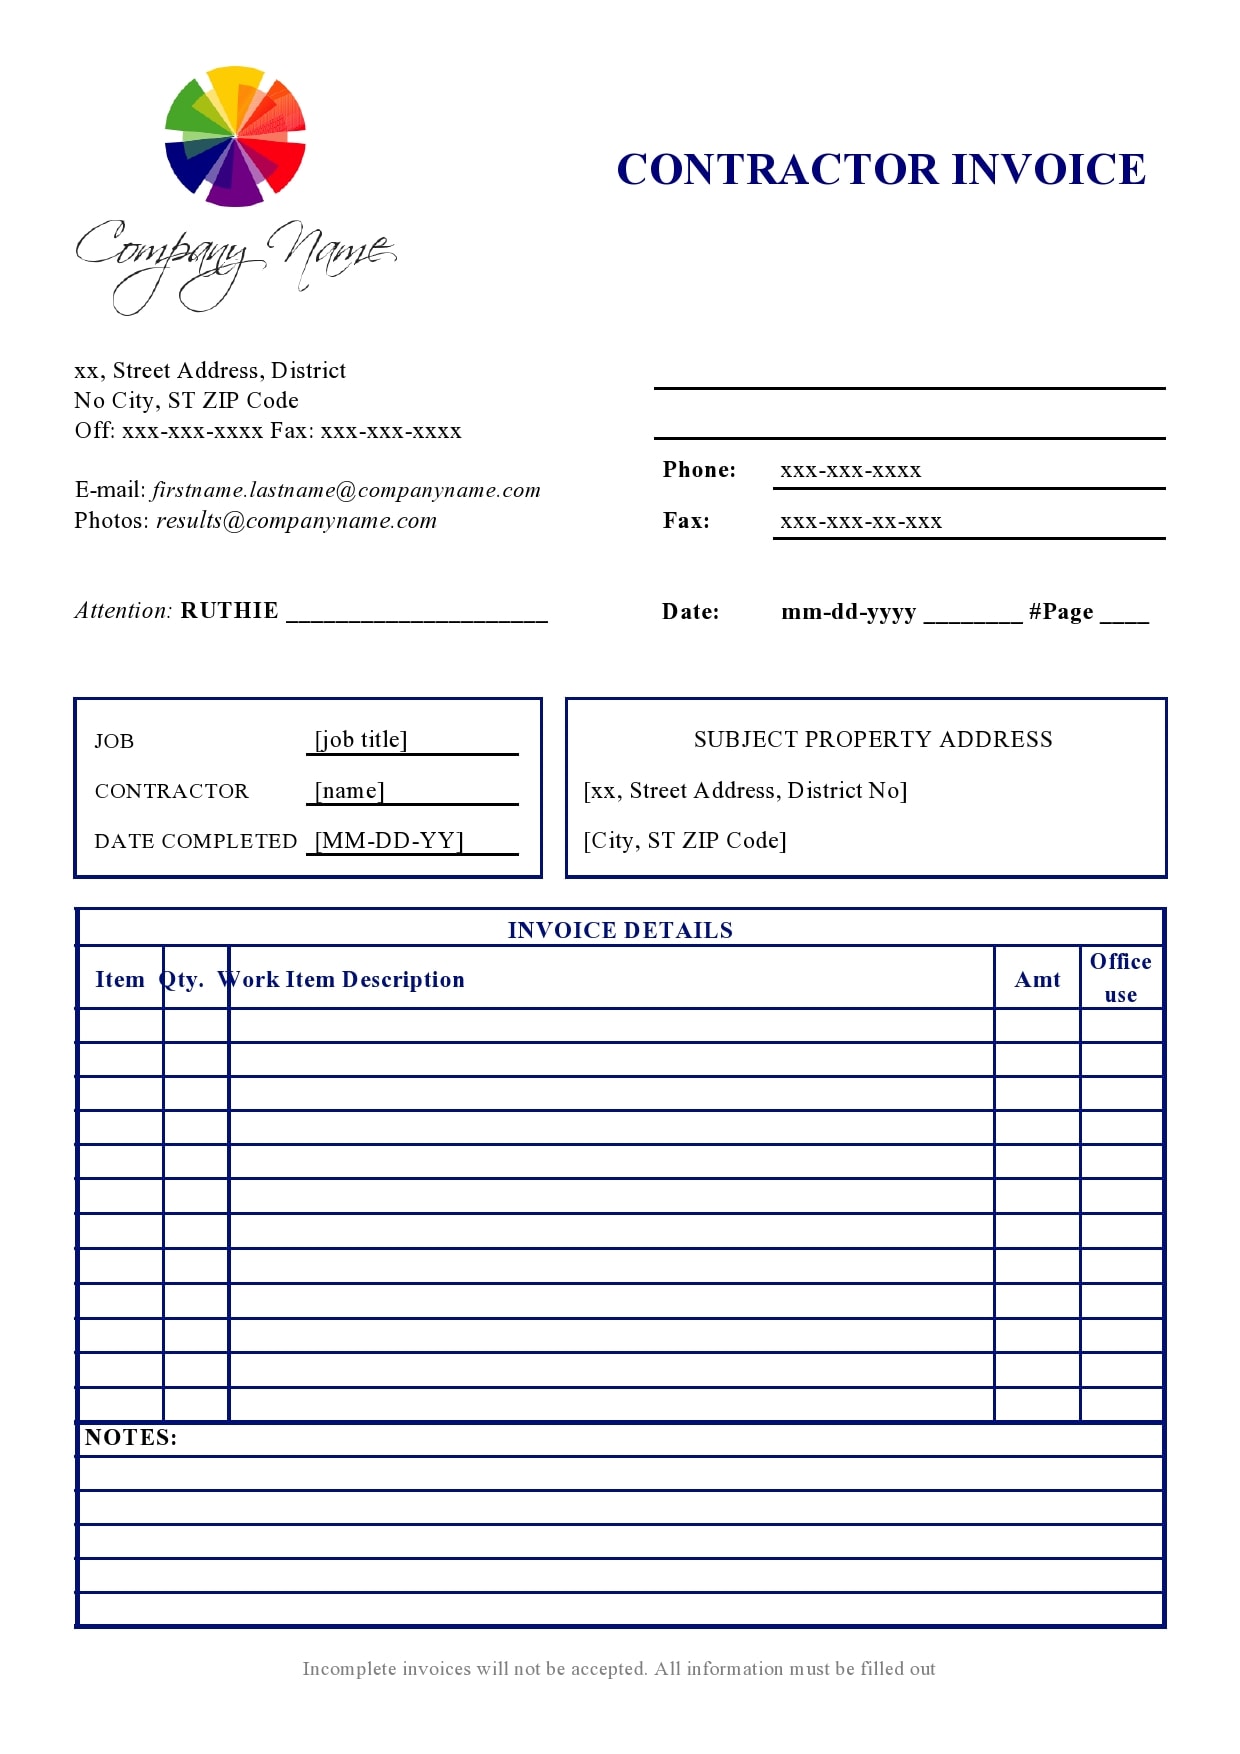 28-independent-contractor-invoice-templates-free